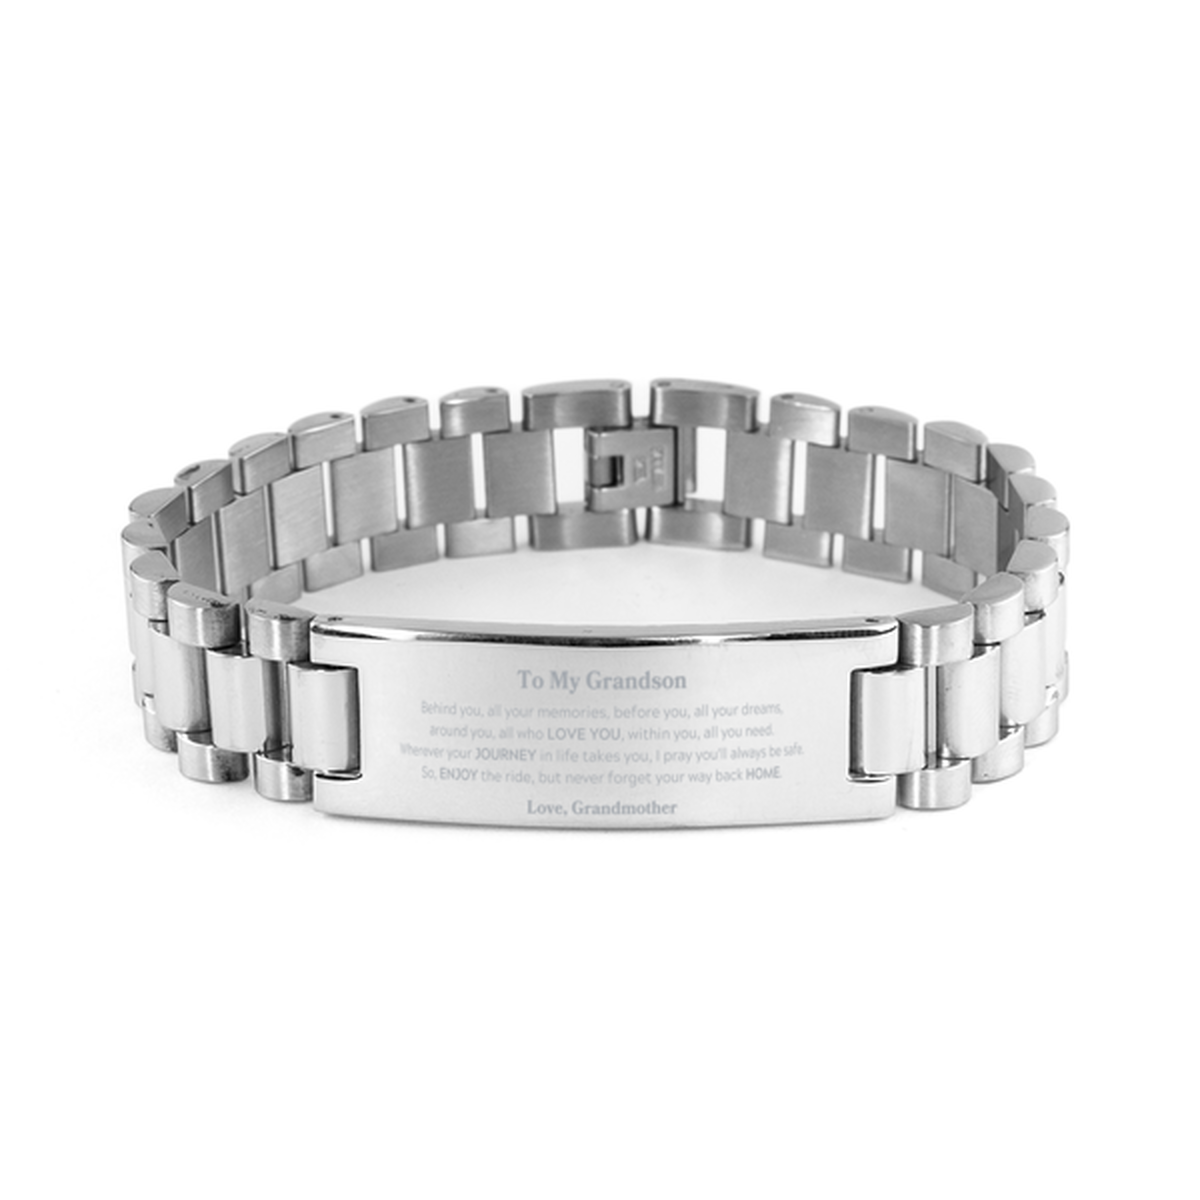 To My Grandson Graduation Gifts from Grandmother, Grandson Ladder Stainless Steel Bracelet Christmas Birthday Gifts for Grandson Behind you, all your memories, before you, all your dreams. Love, Grandmother